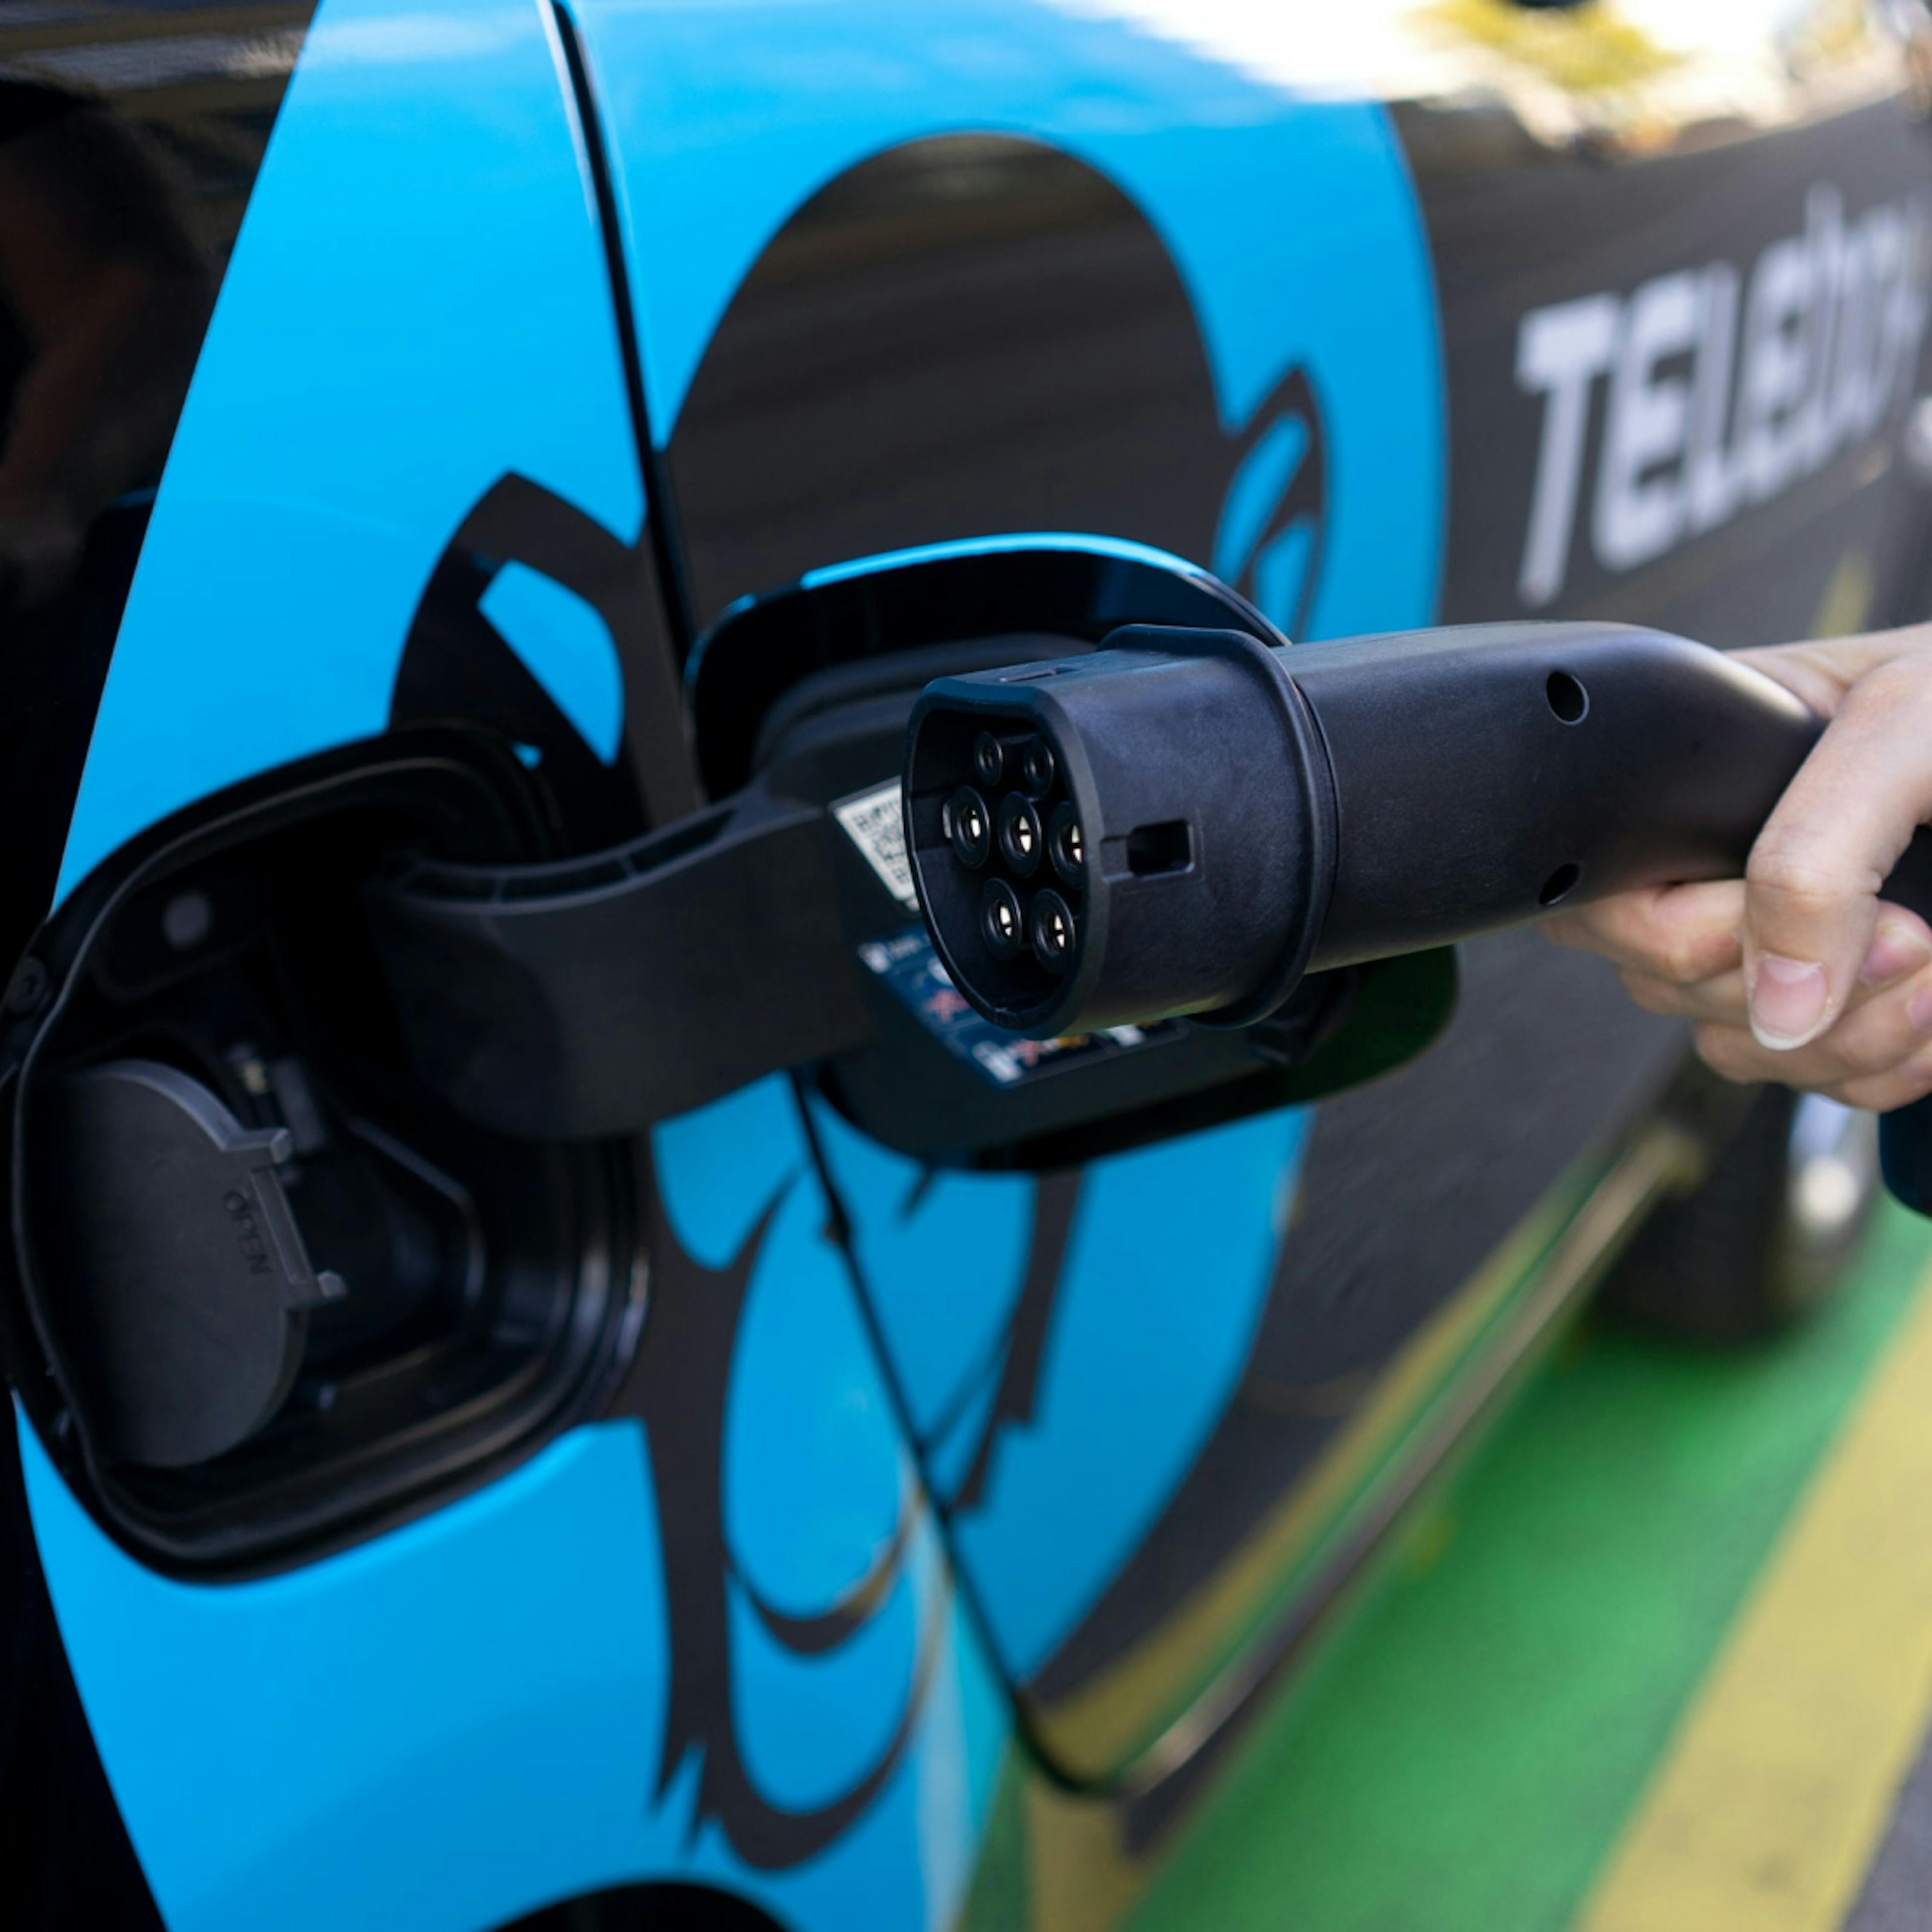 An electric car being charged shows a small part of combating climate change challenges